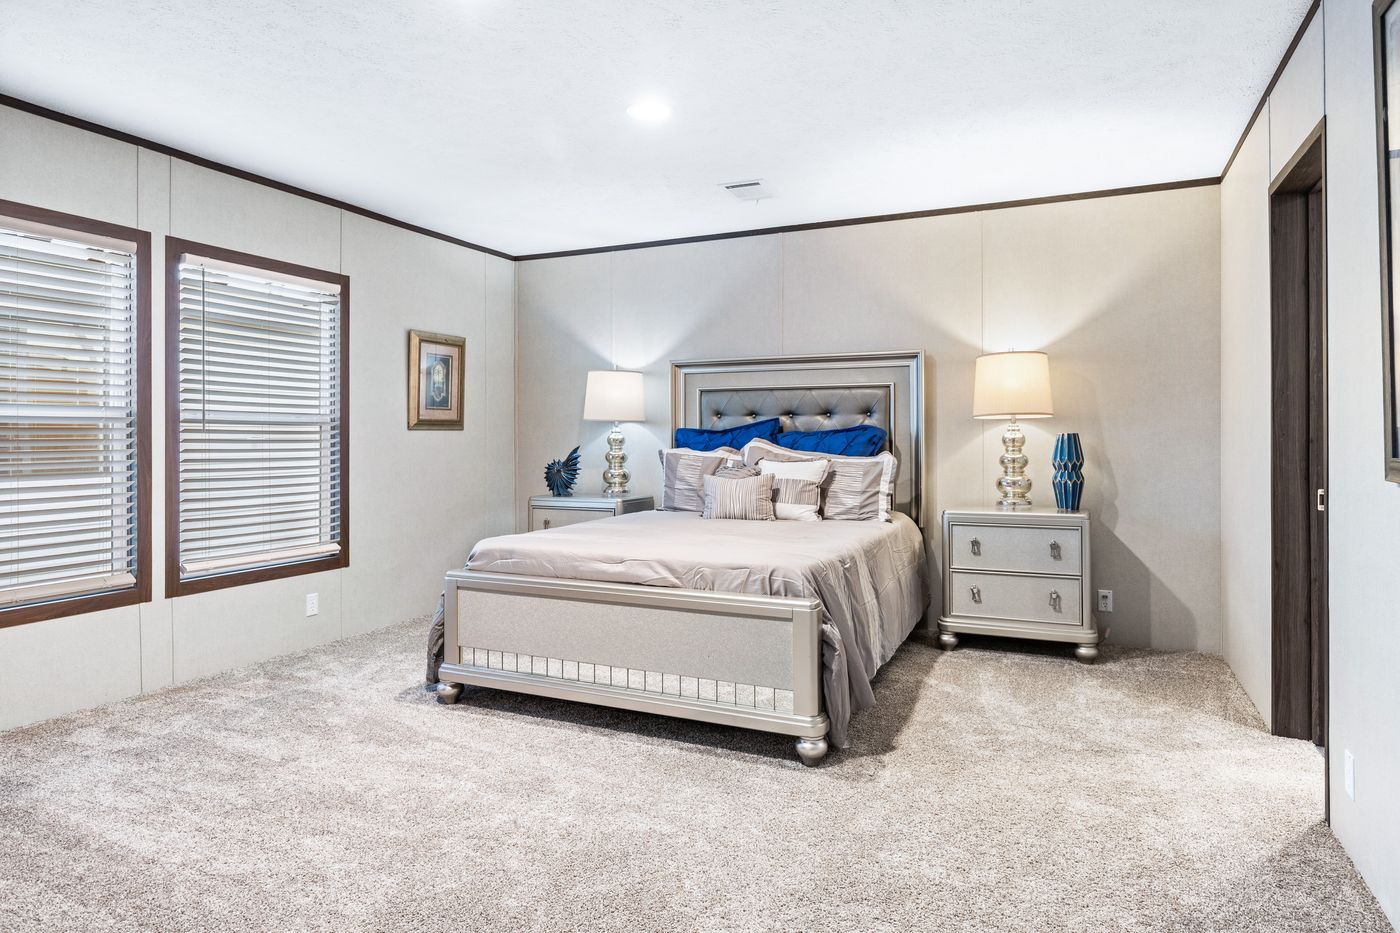 The HERCULES Primary Bedroom. This Manufactured Mobile Home features 4 bedrooms and 2 baths.